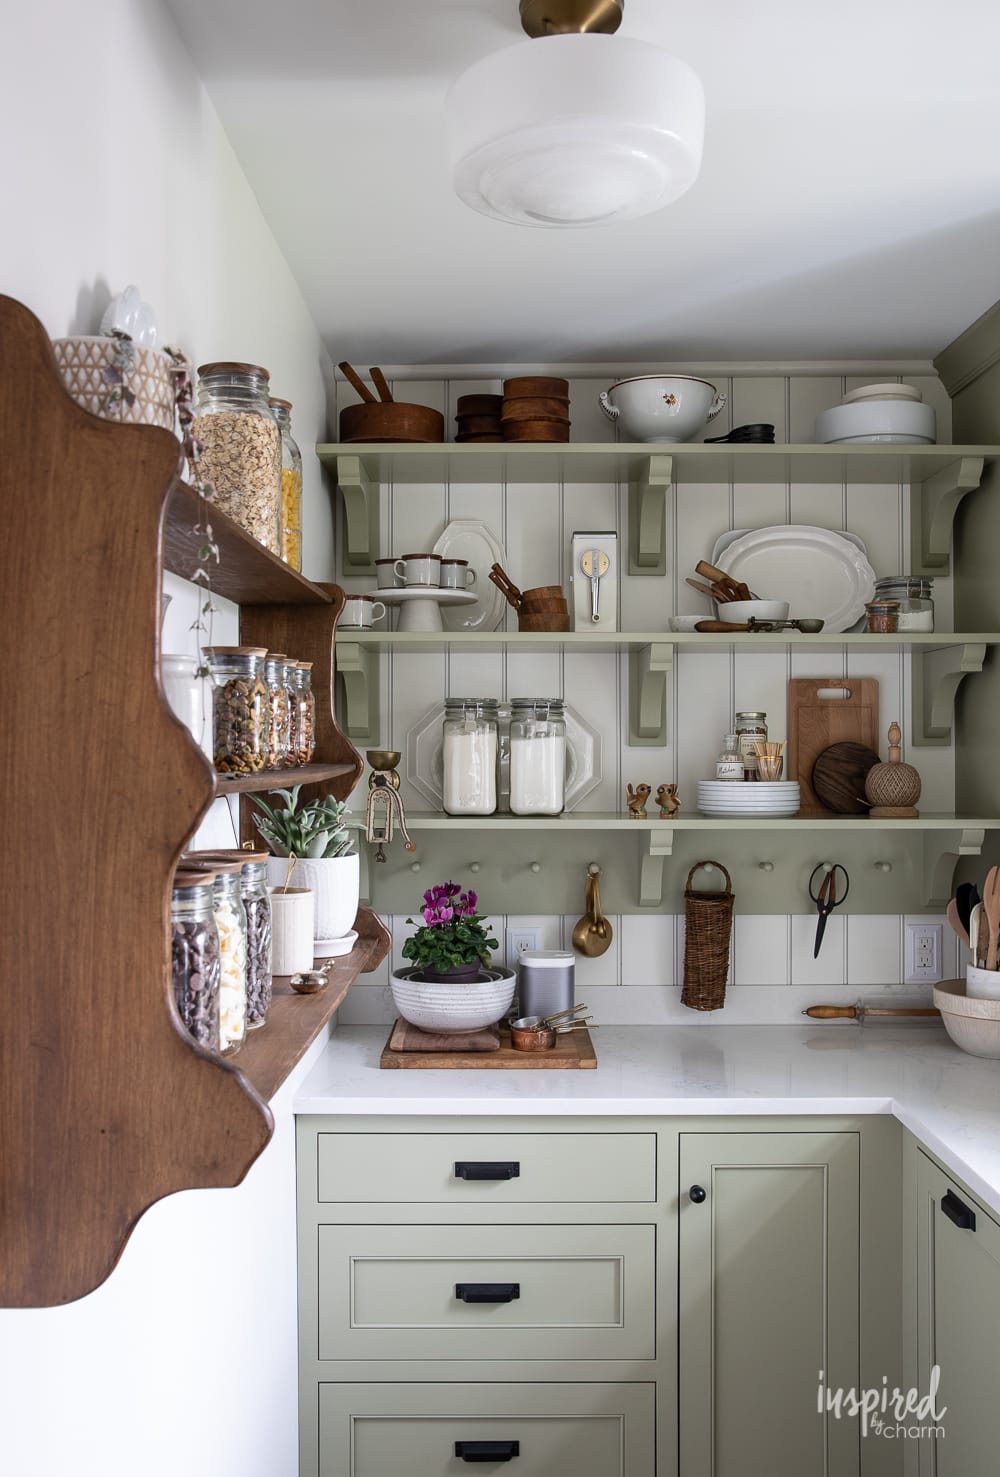 filled butlers pantry with wood shelf on the wall and cabinets and shelves painted Sherwin-Williams sage.